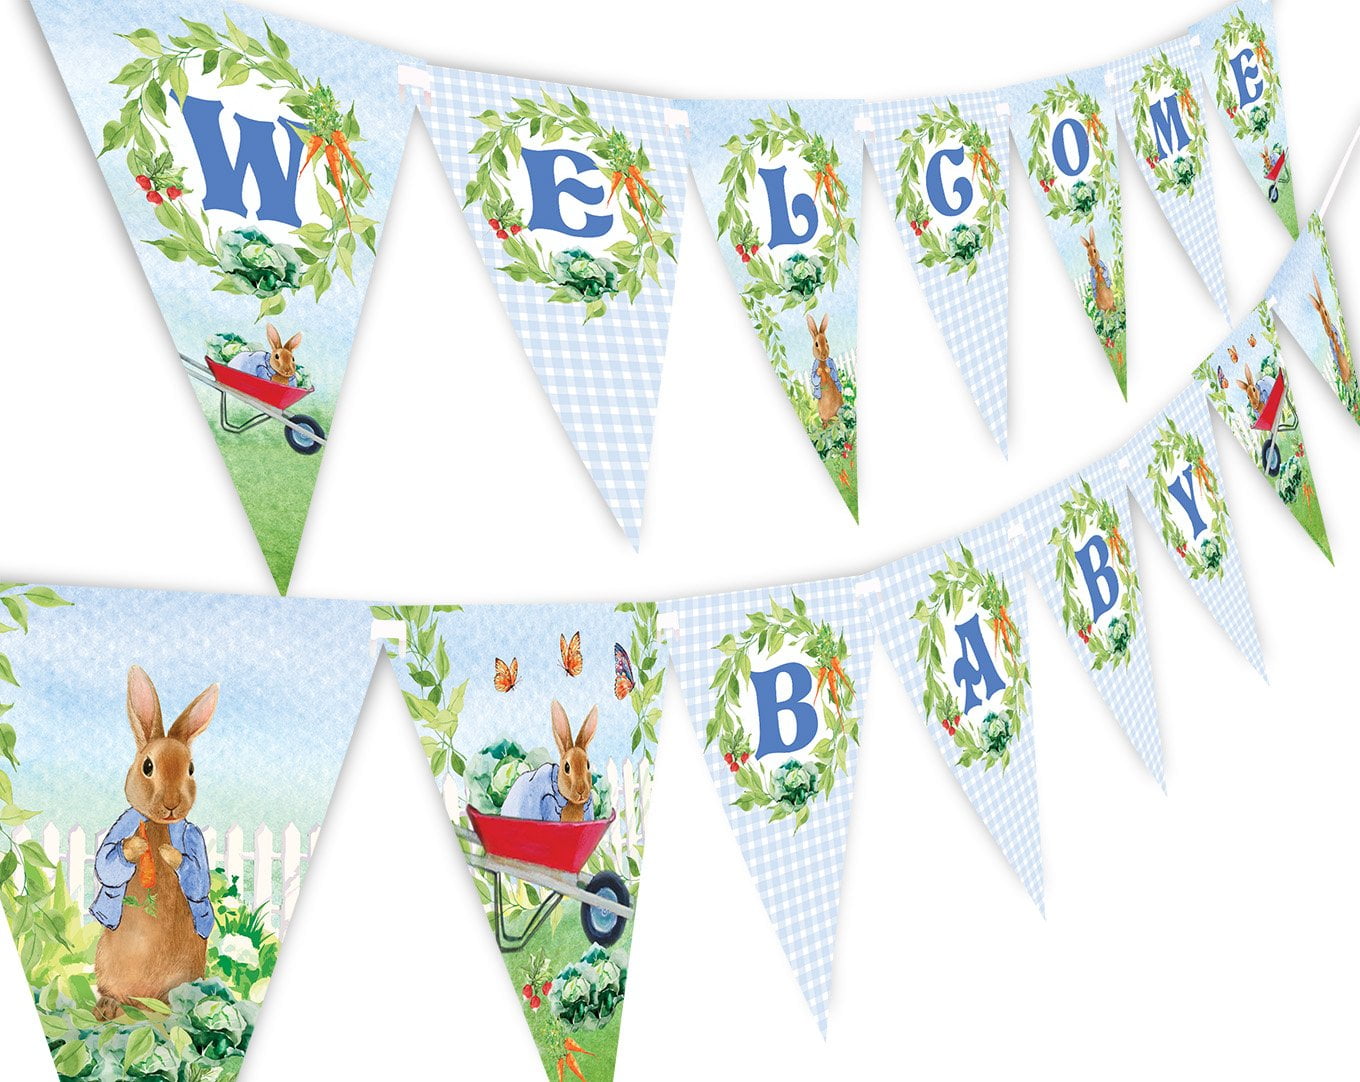 Peter Rabbit Arrow Quote Signs Prop Birthday Party/Baby Shower Decoration BLUE